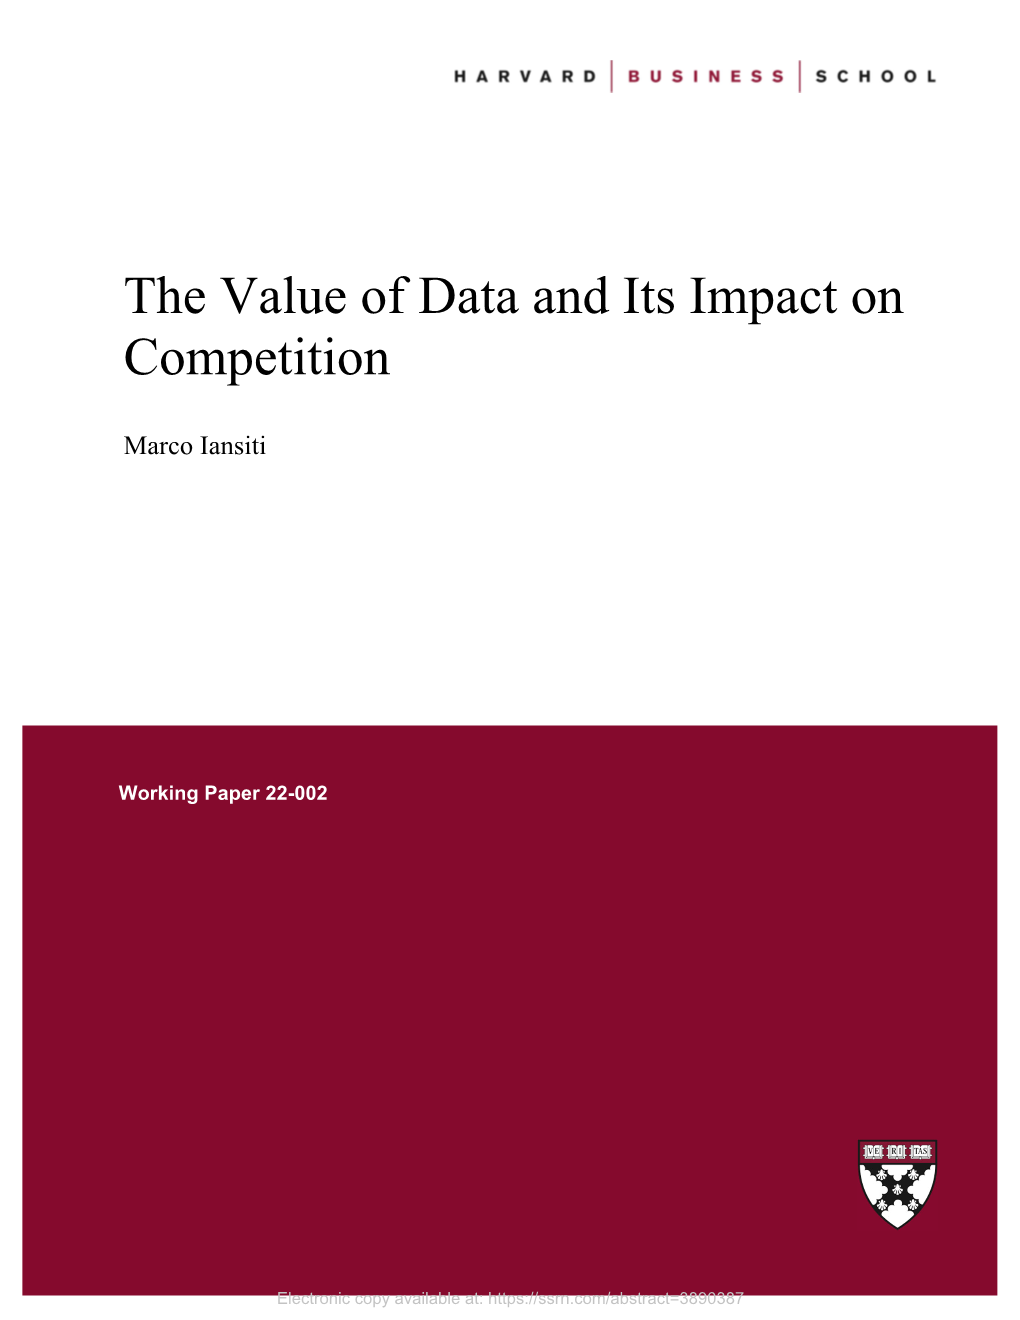 Iansiti, Marco, the Value of Data and Its Impact on Competition